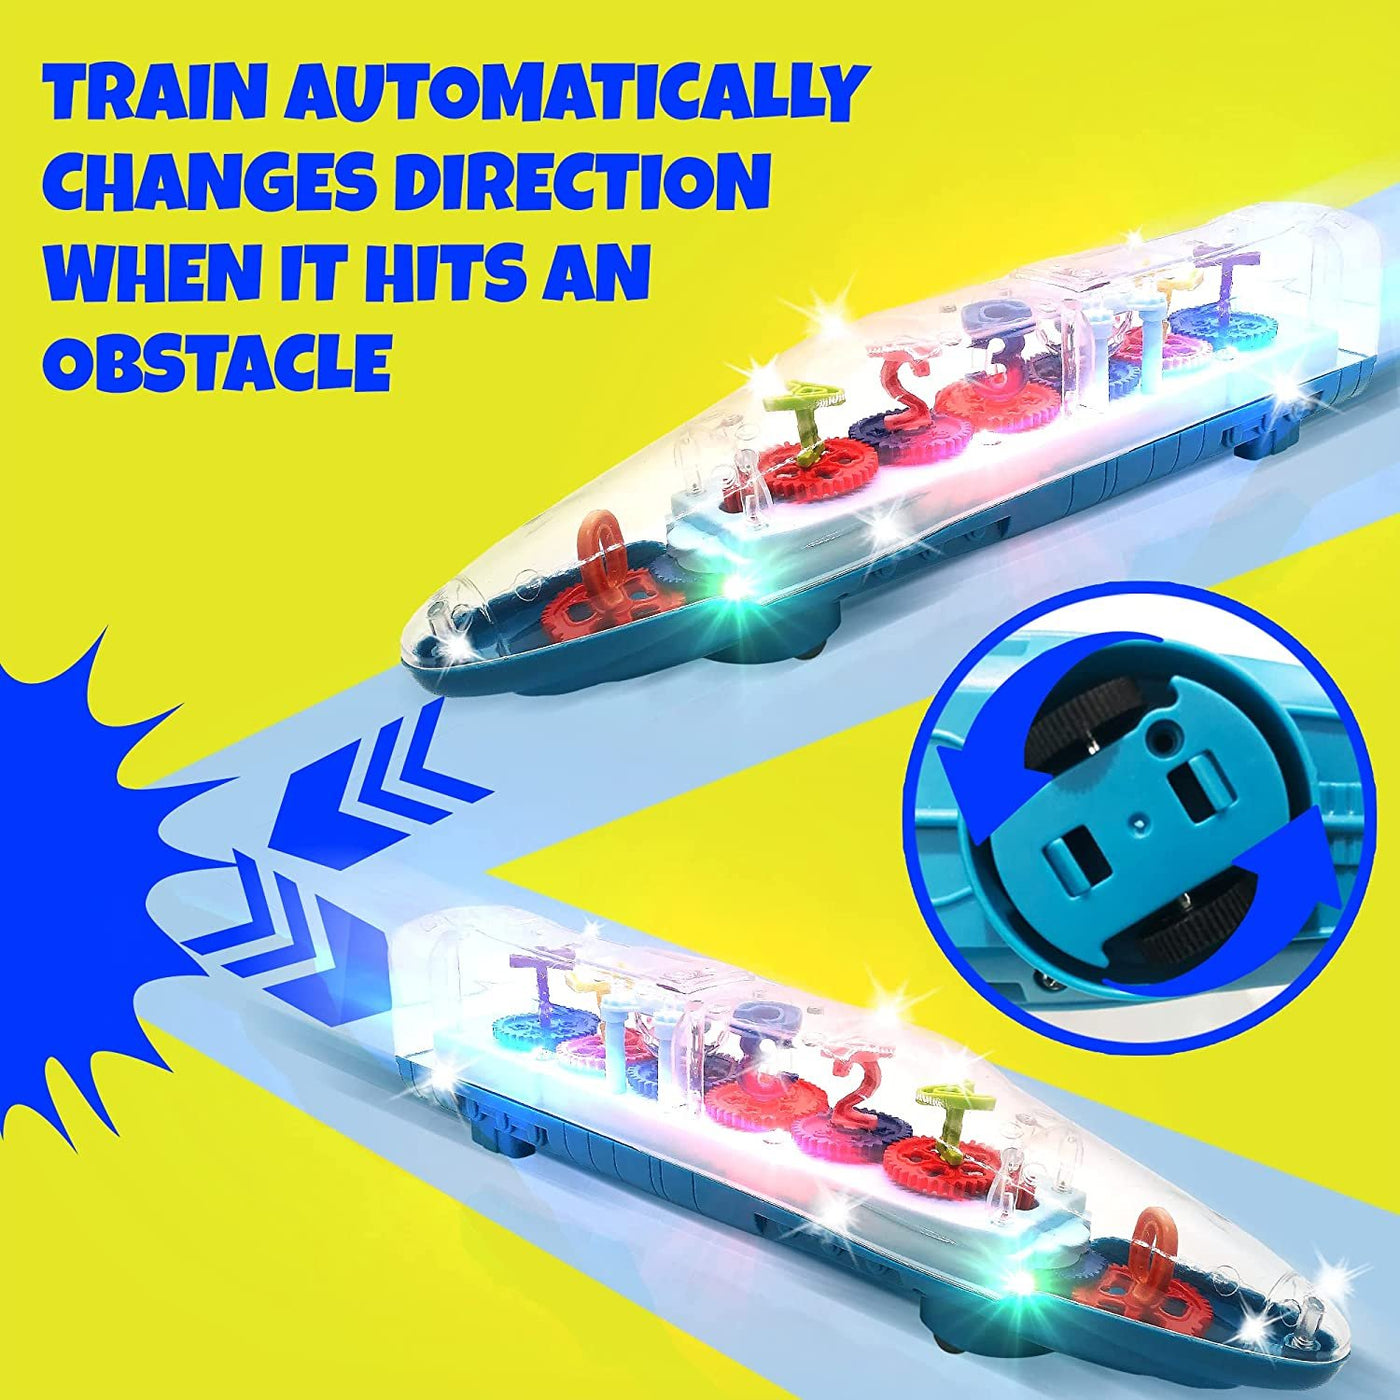 Light Up Transparent Train Toys For 3 Year Old Boys, Train Gifts For Boys, Bump and Go Electric Train For Kids with Colorful Moving Gears, Music, LED, Alphabets and Numbers, Train For 3+ Year Old Boys